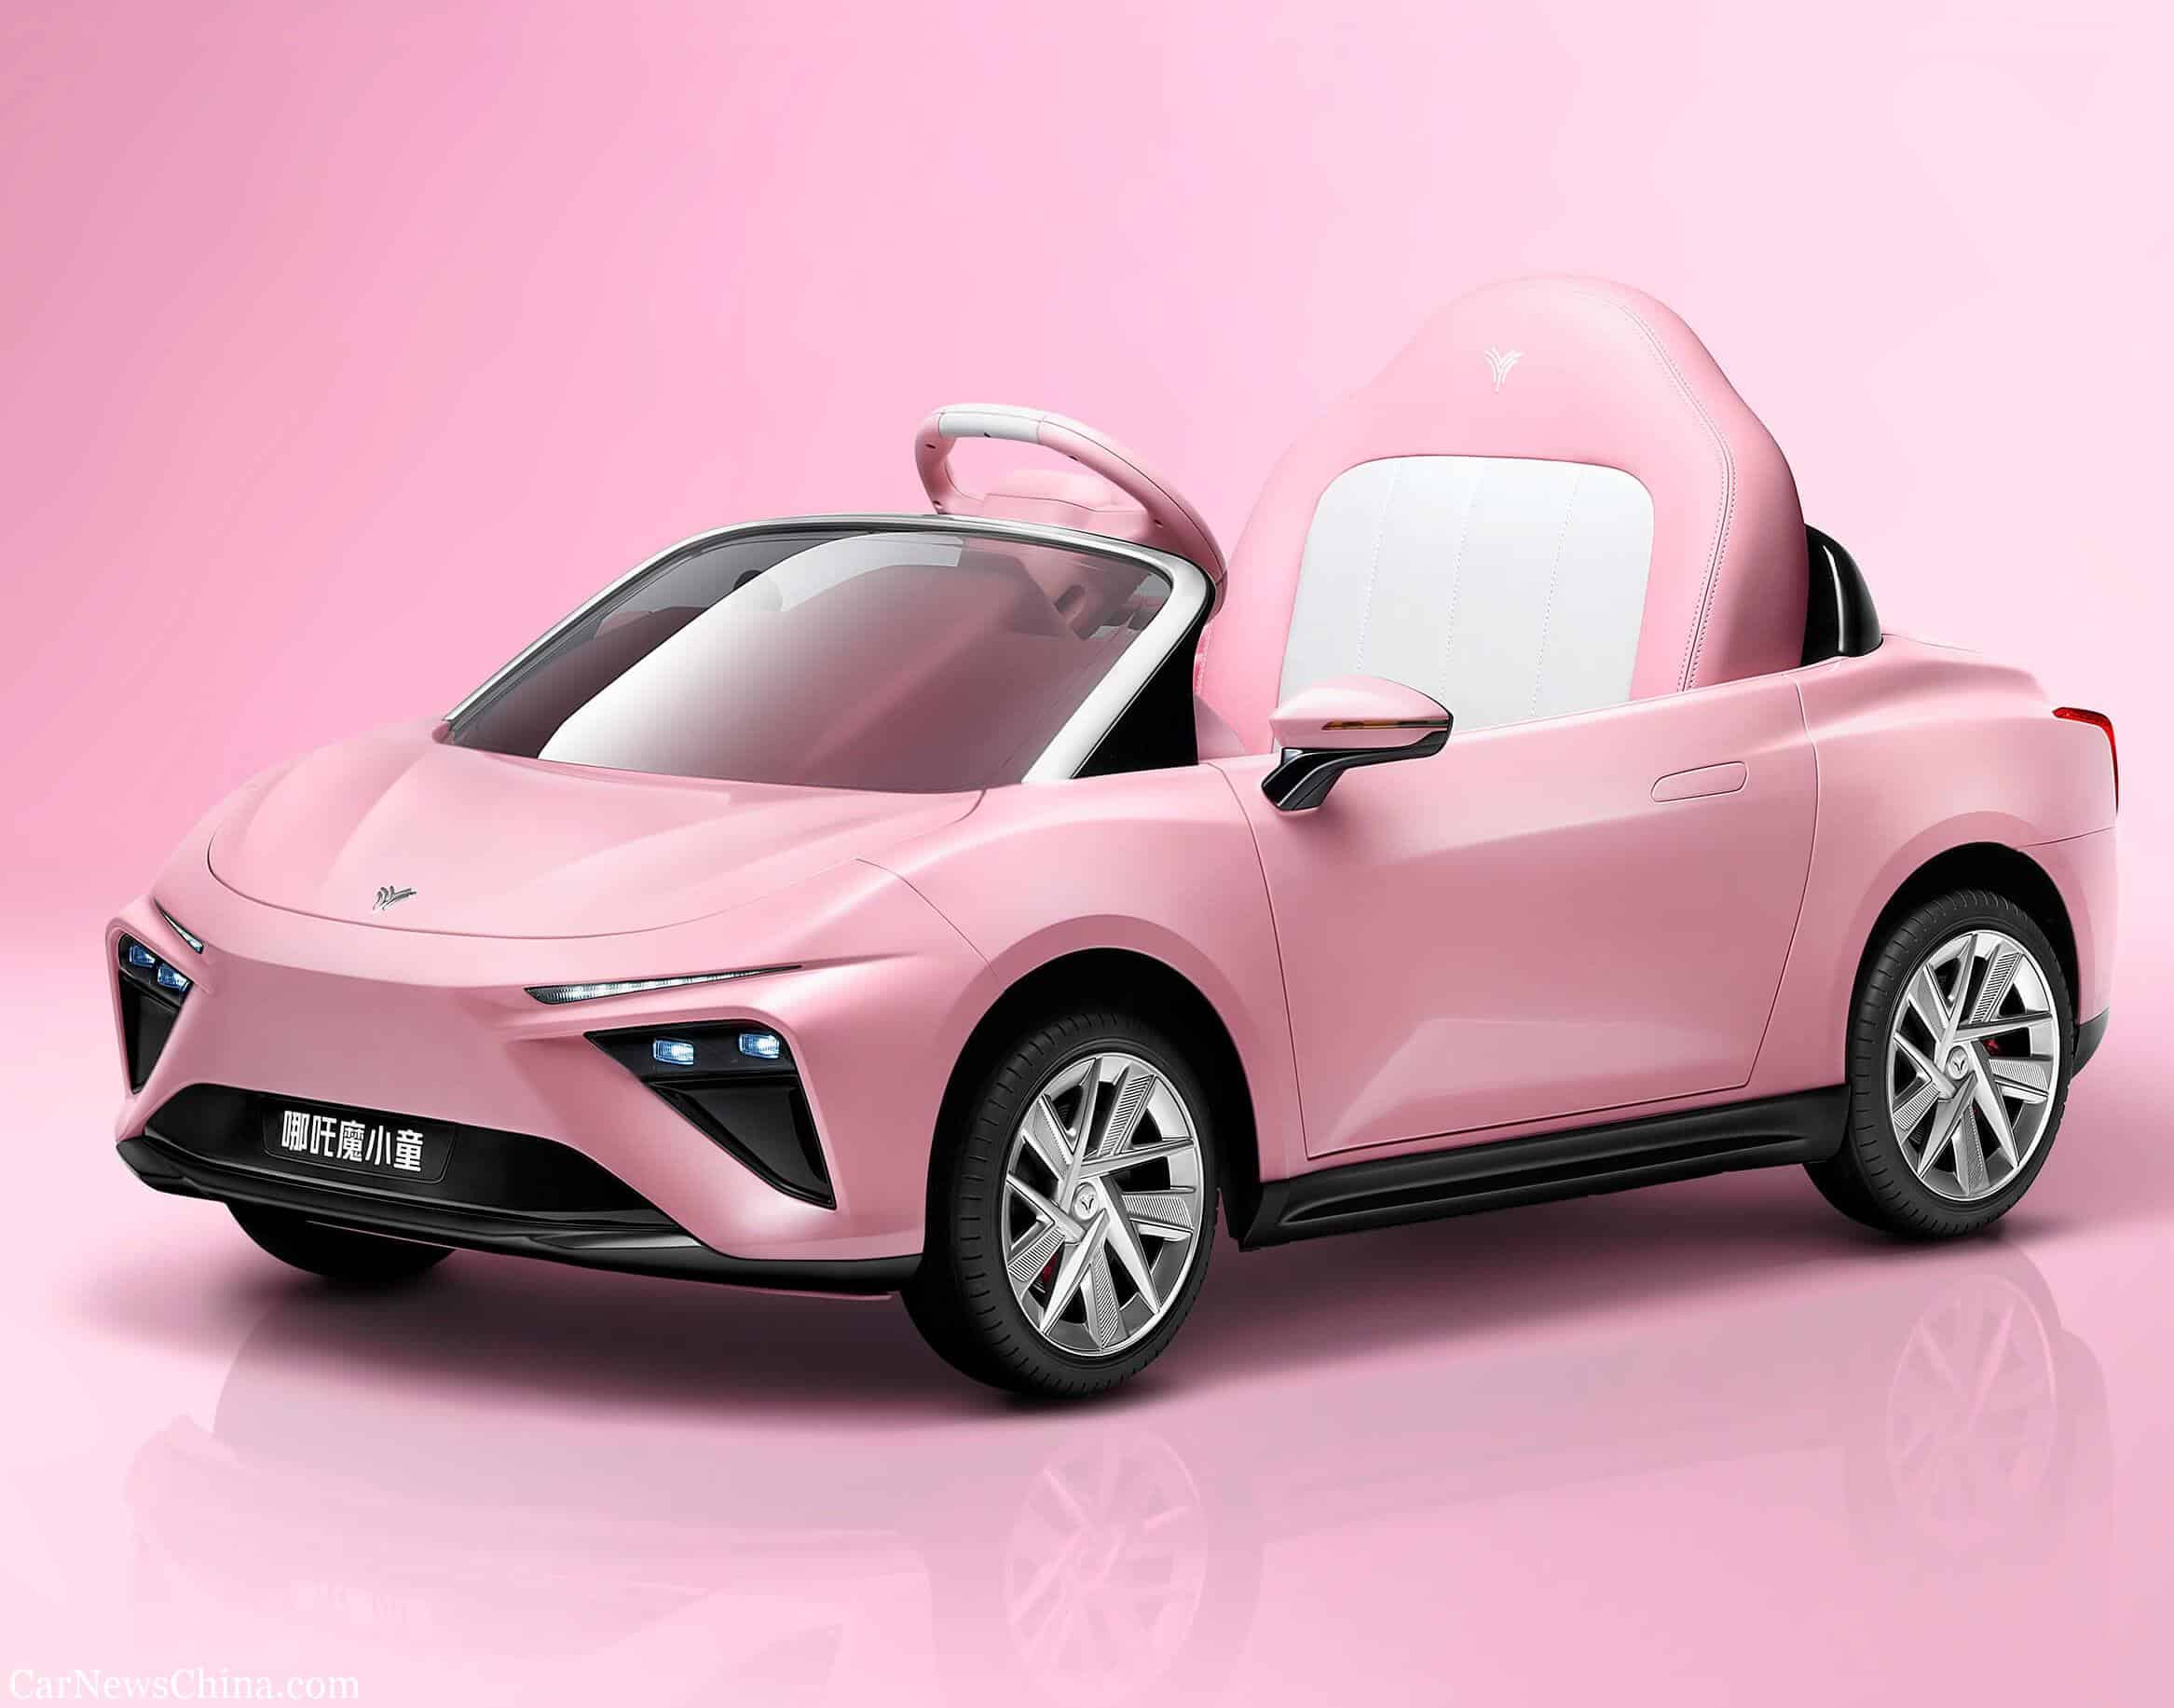 China’s NETA Launches Pink Electric Kiddie Car Called ‘Magic Kid’ And It Has Exhaust Pipes